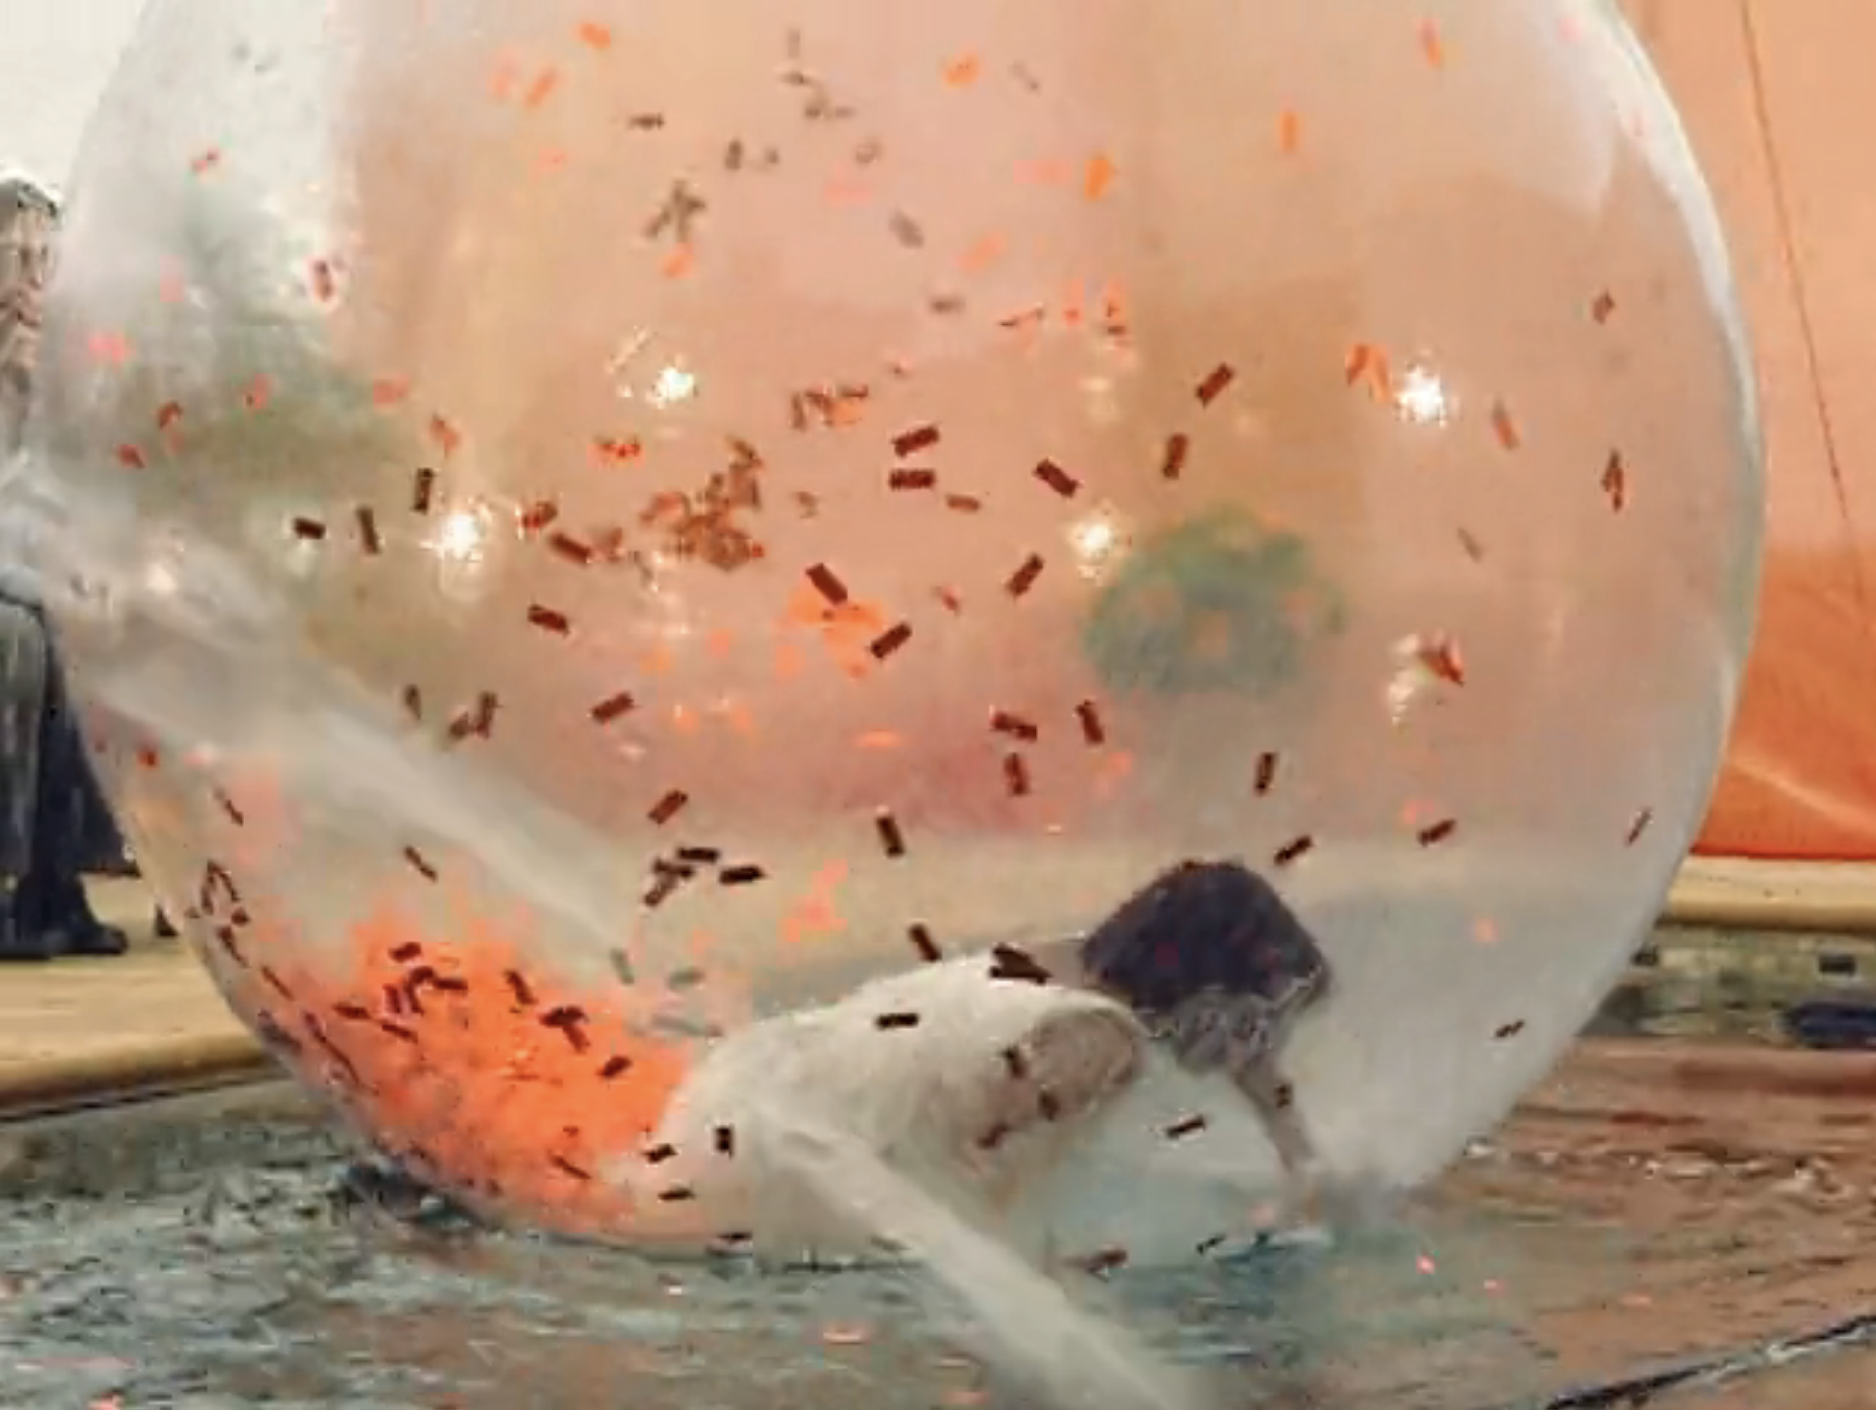 A contestant attempts to get out of the water while inside her bubble